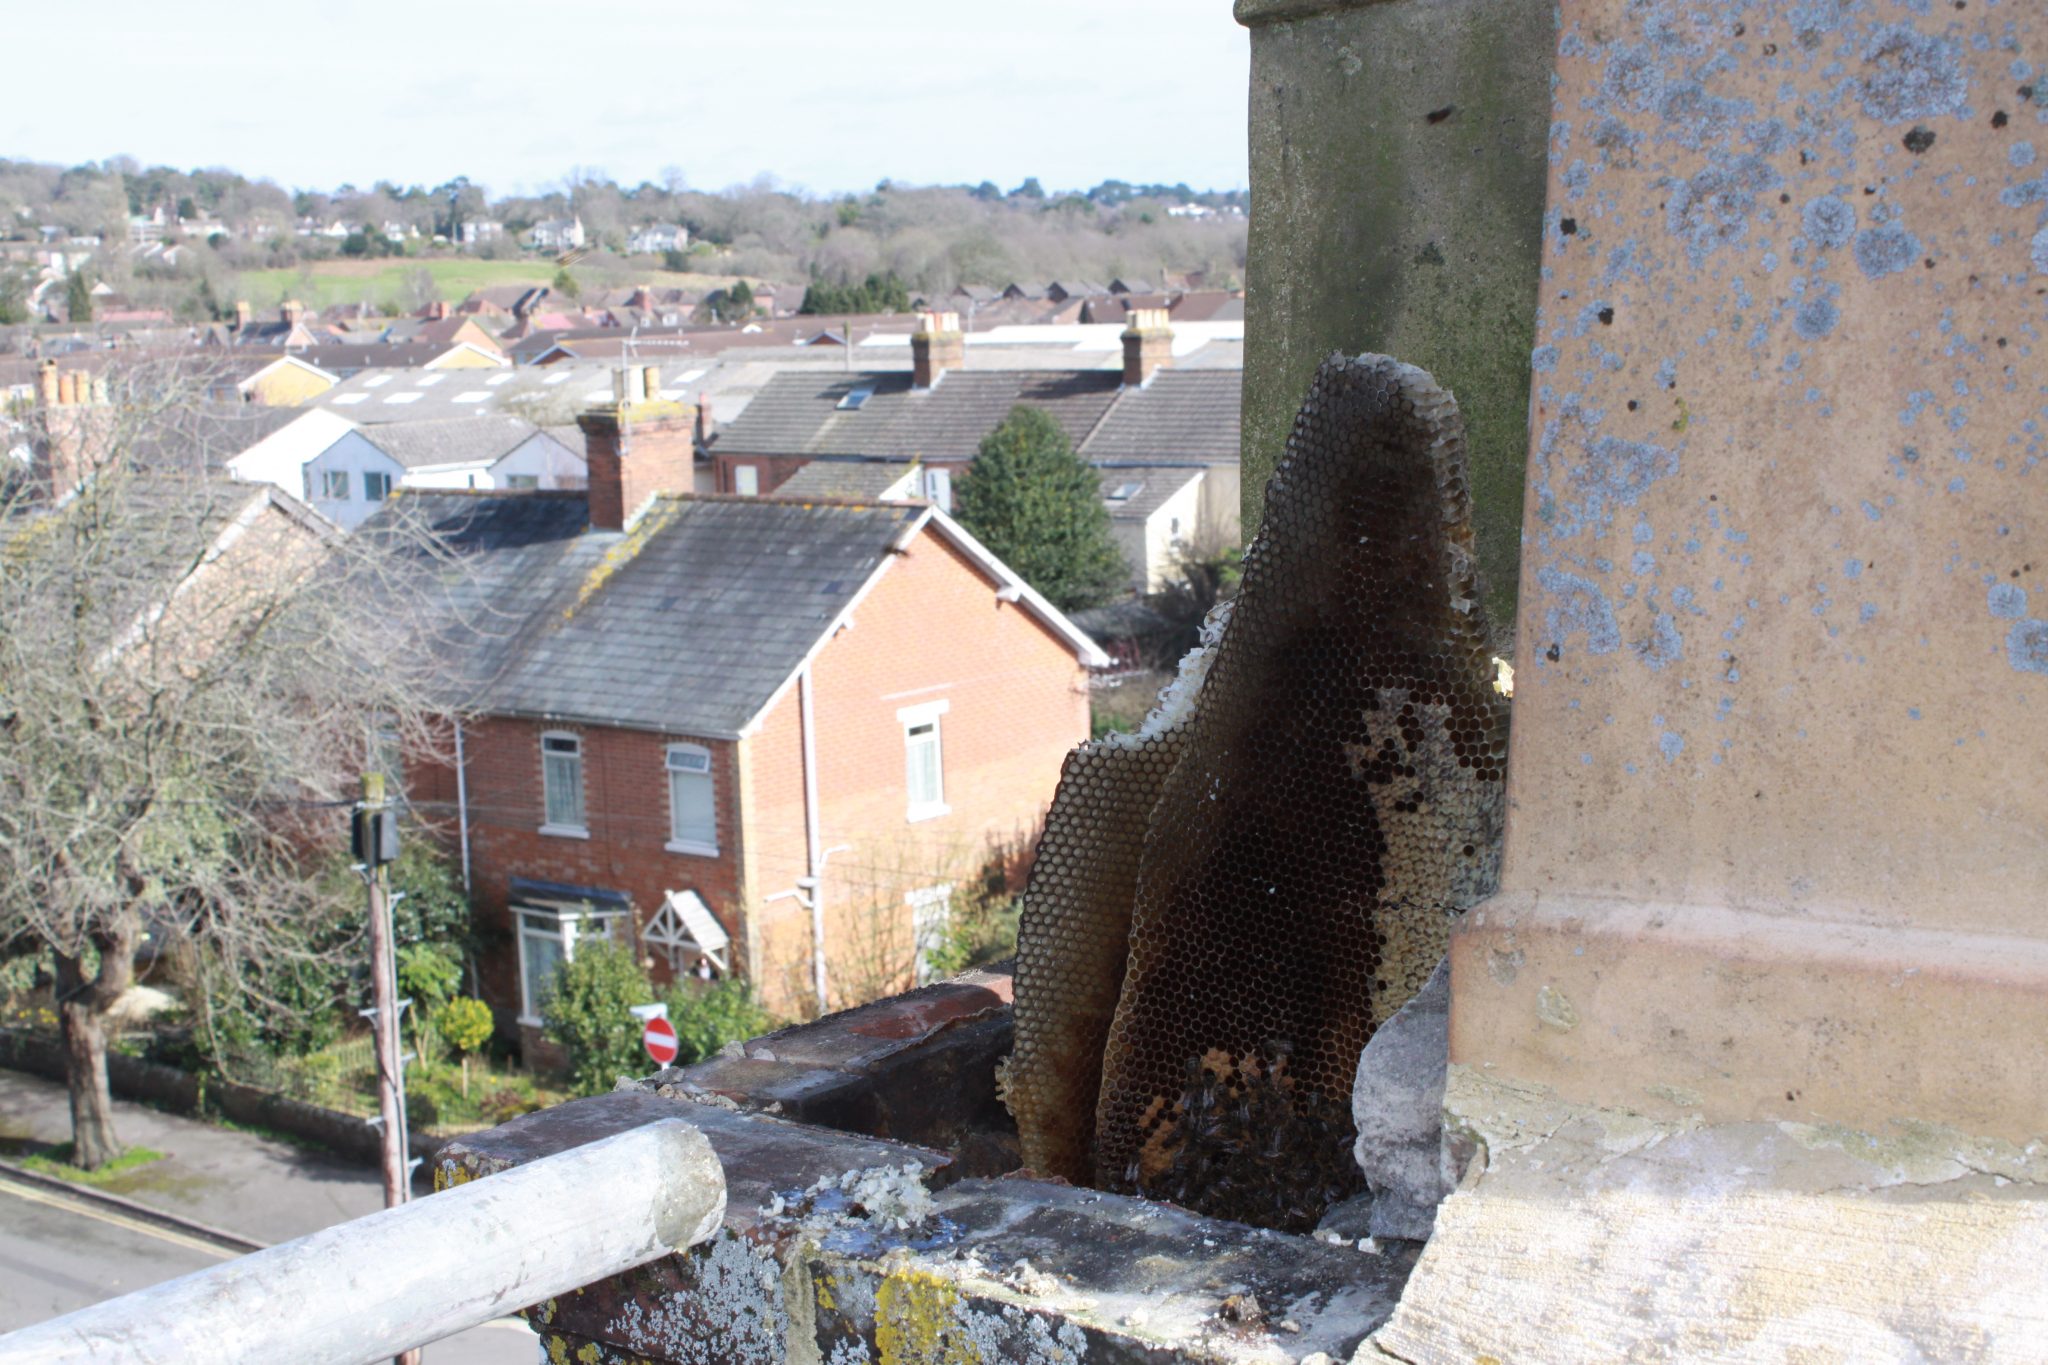 Swarm-Catcher-Honey-Bee-Removal-from-chimney-Poole-Dorset